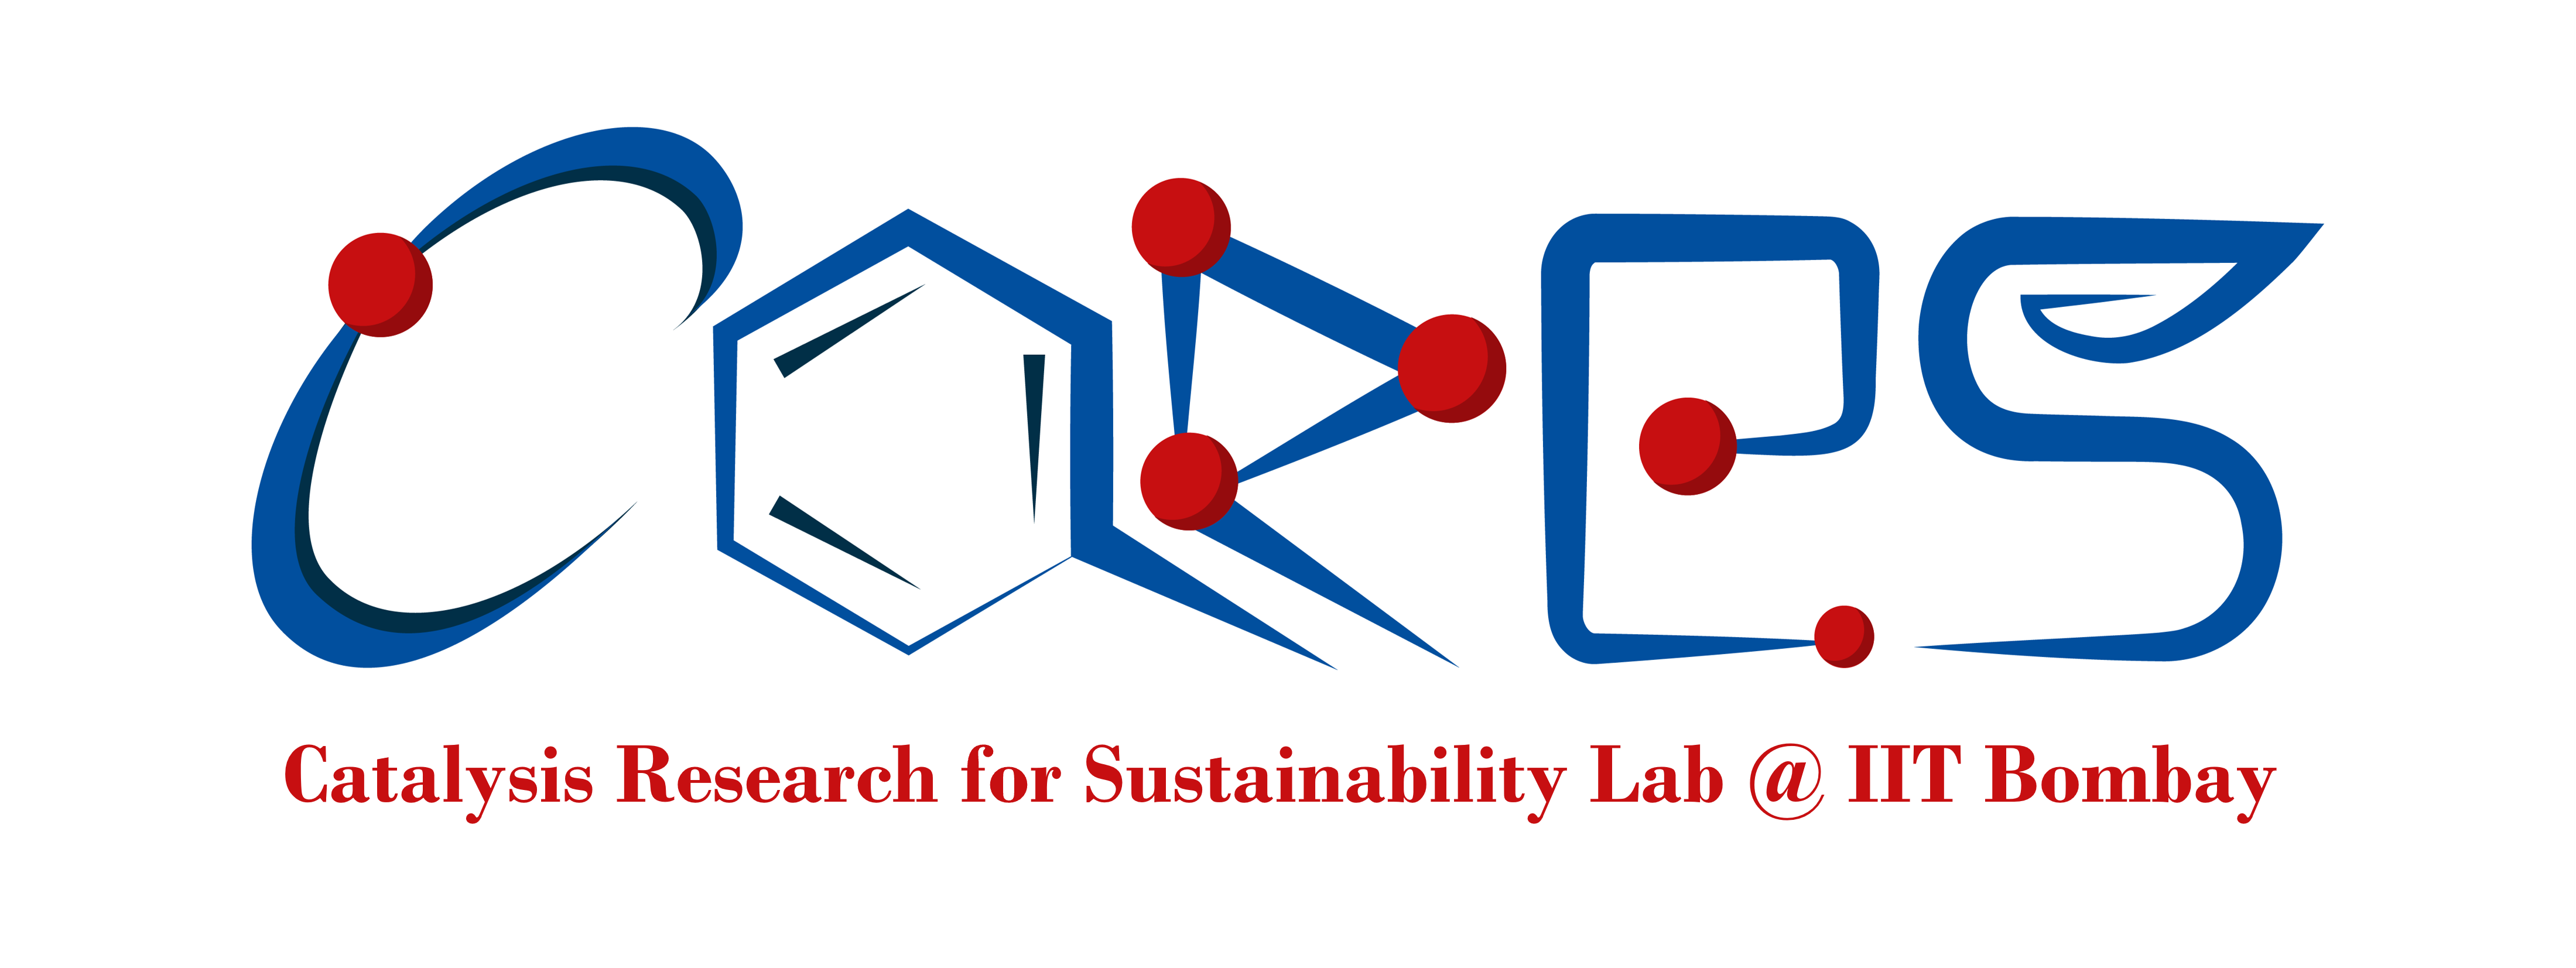 Catalysis Research for Sustainability Lab @IIT Bombay